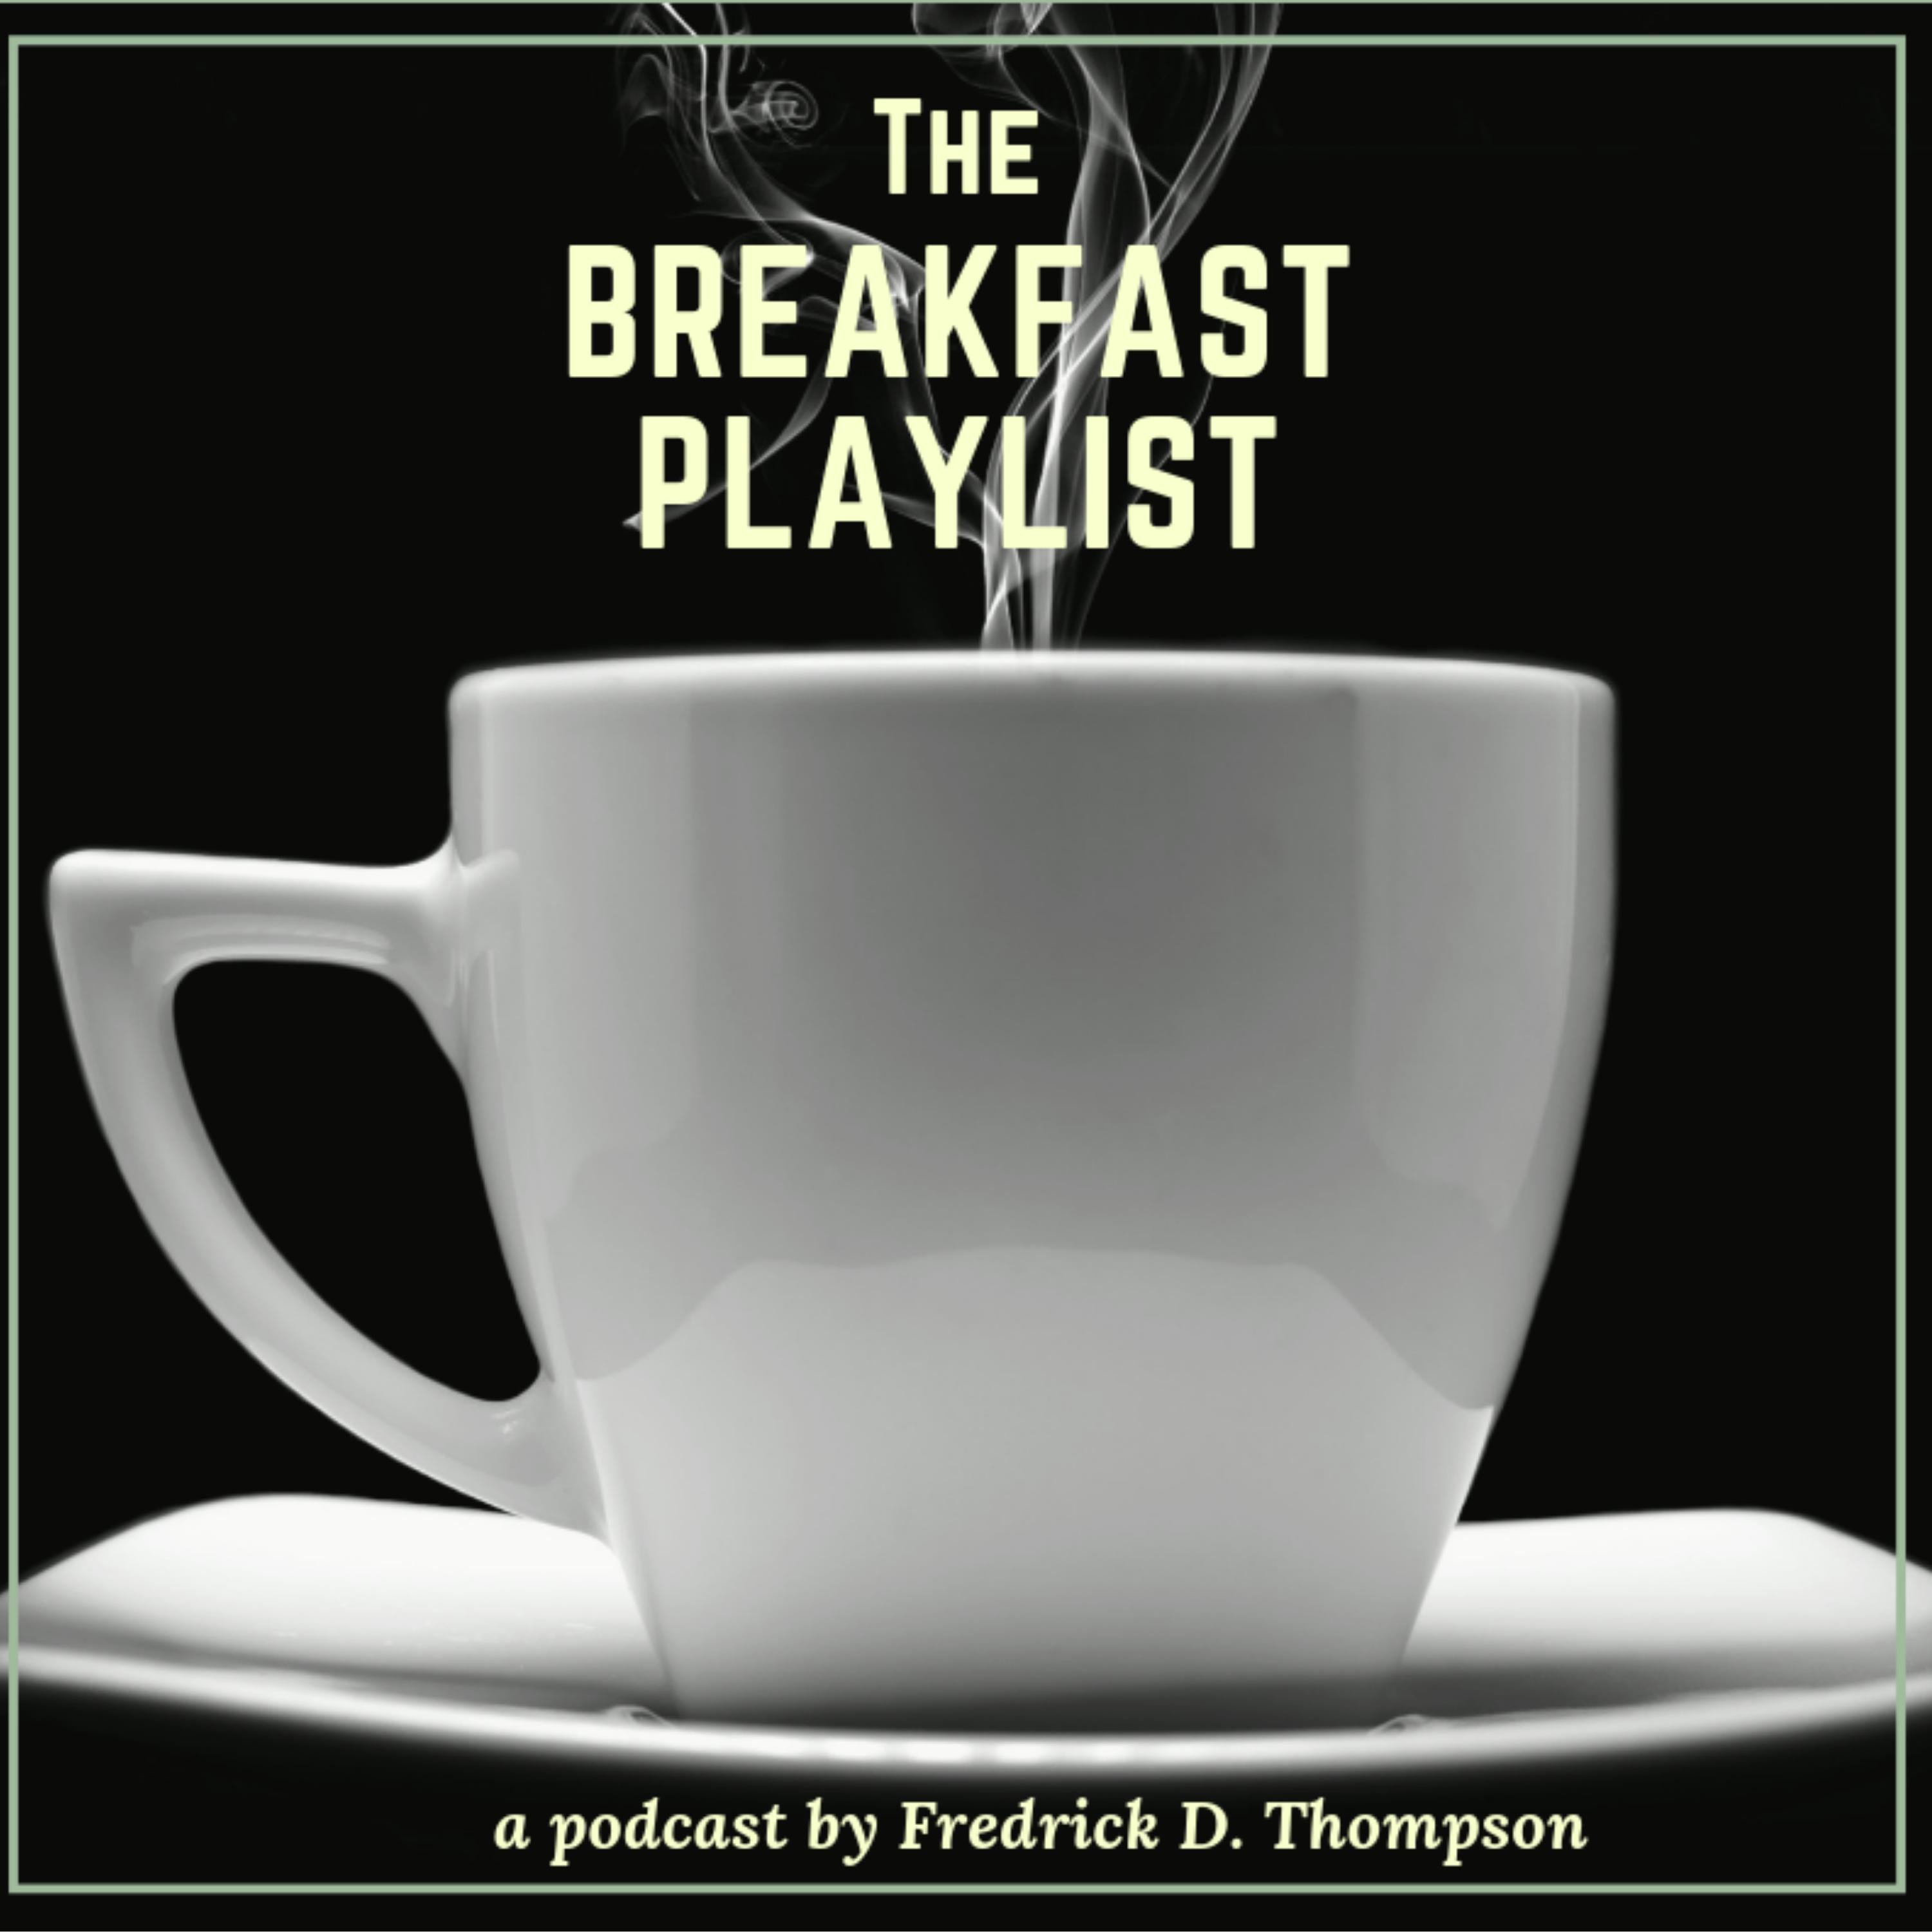 Discover a unique breakfast experience by listening to Fredrick D. Thompson discuss motivational topics that will unlock your true passion.